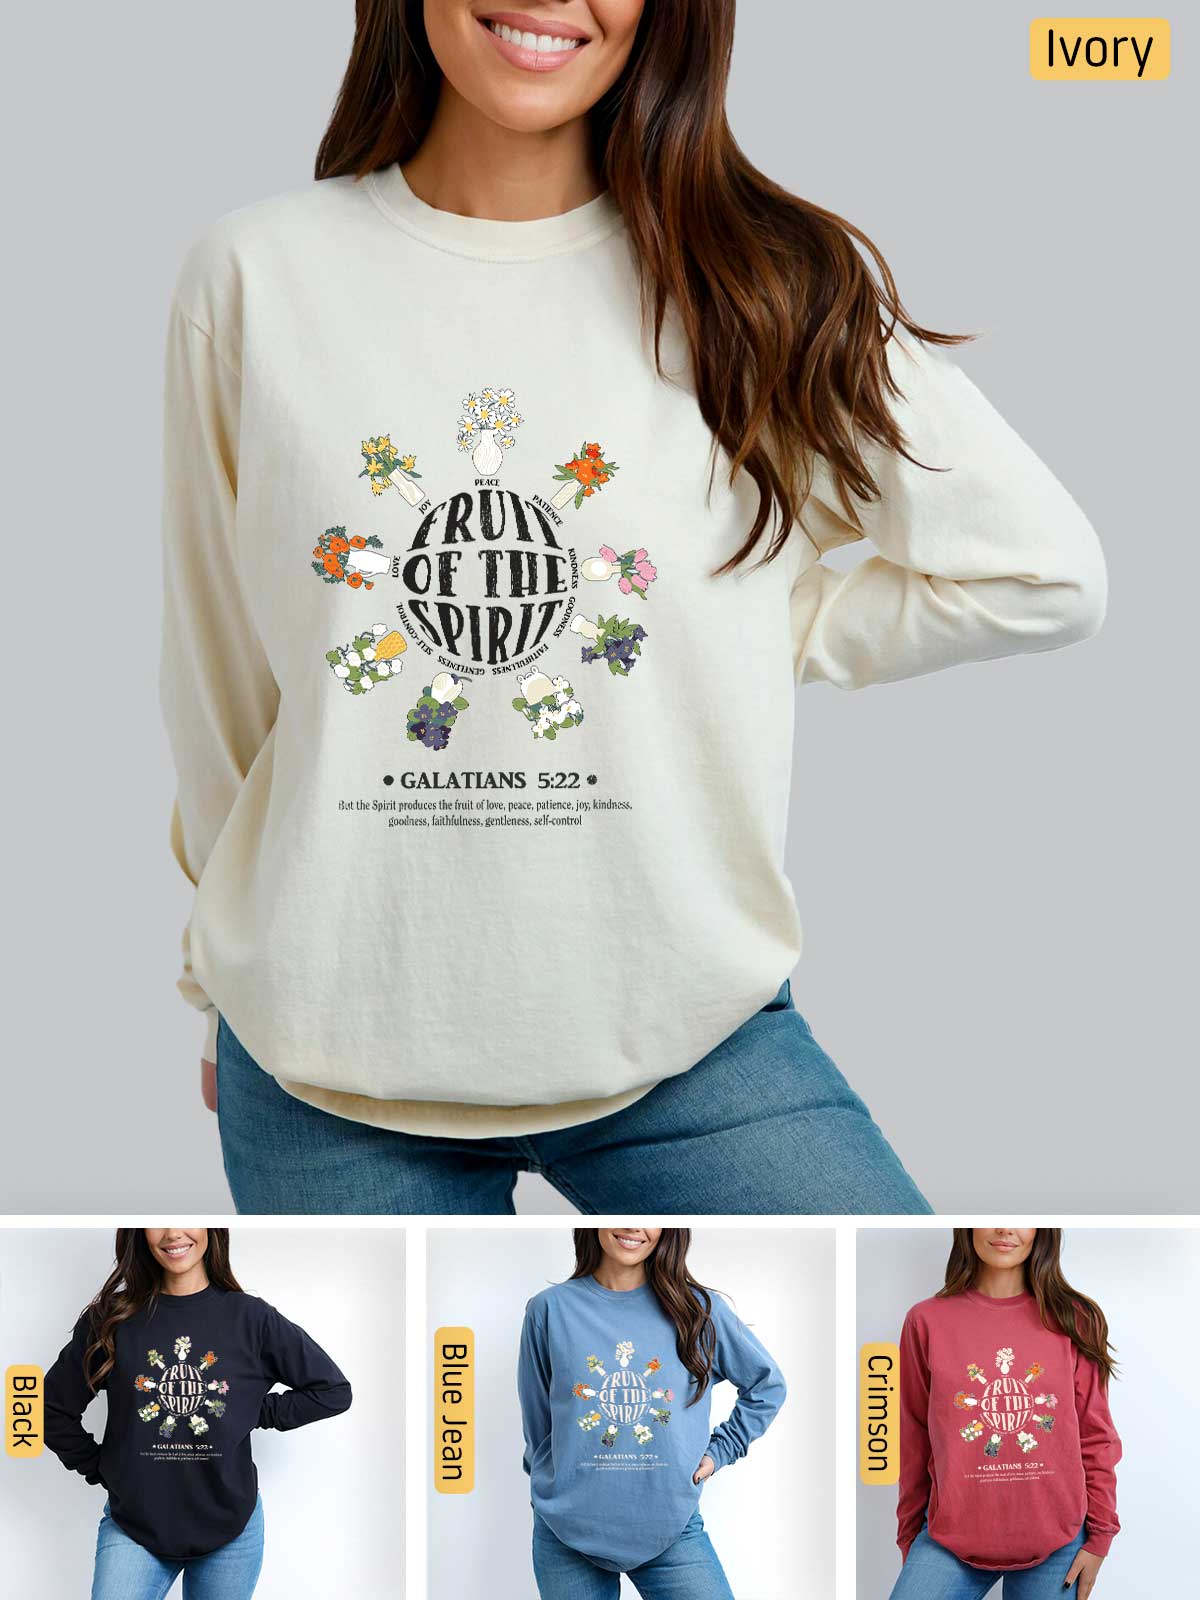 a woman wearing a sweatshirt with the words run of the spirit printed on it